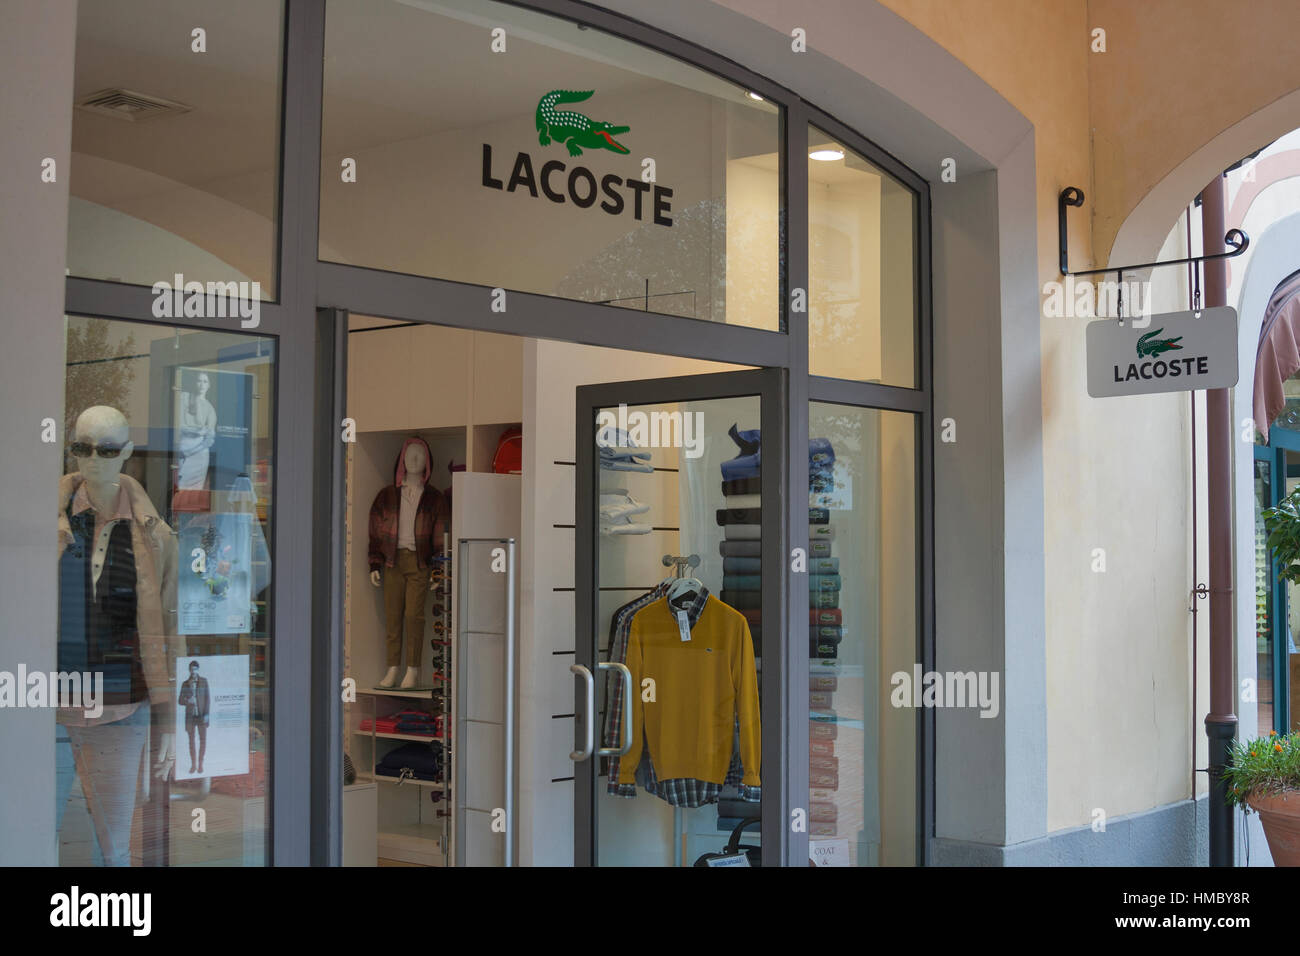 MUGELLO, ITALY - SEPTEMBER 11, 2014: Facade of Lacoste store in McArthurGlen Outlet Barberino situated close to Florence. Lacoste is a Stock Photo Alamy